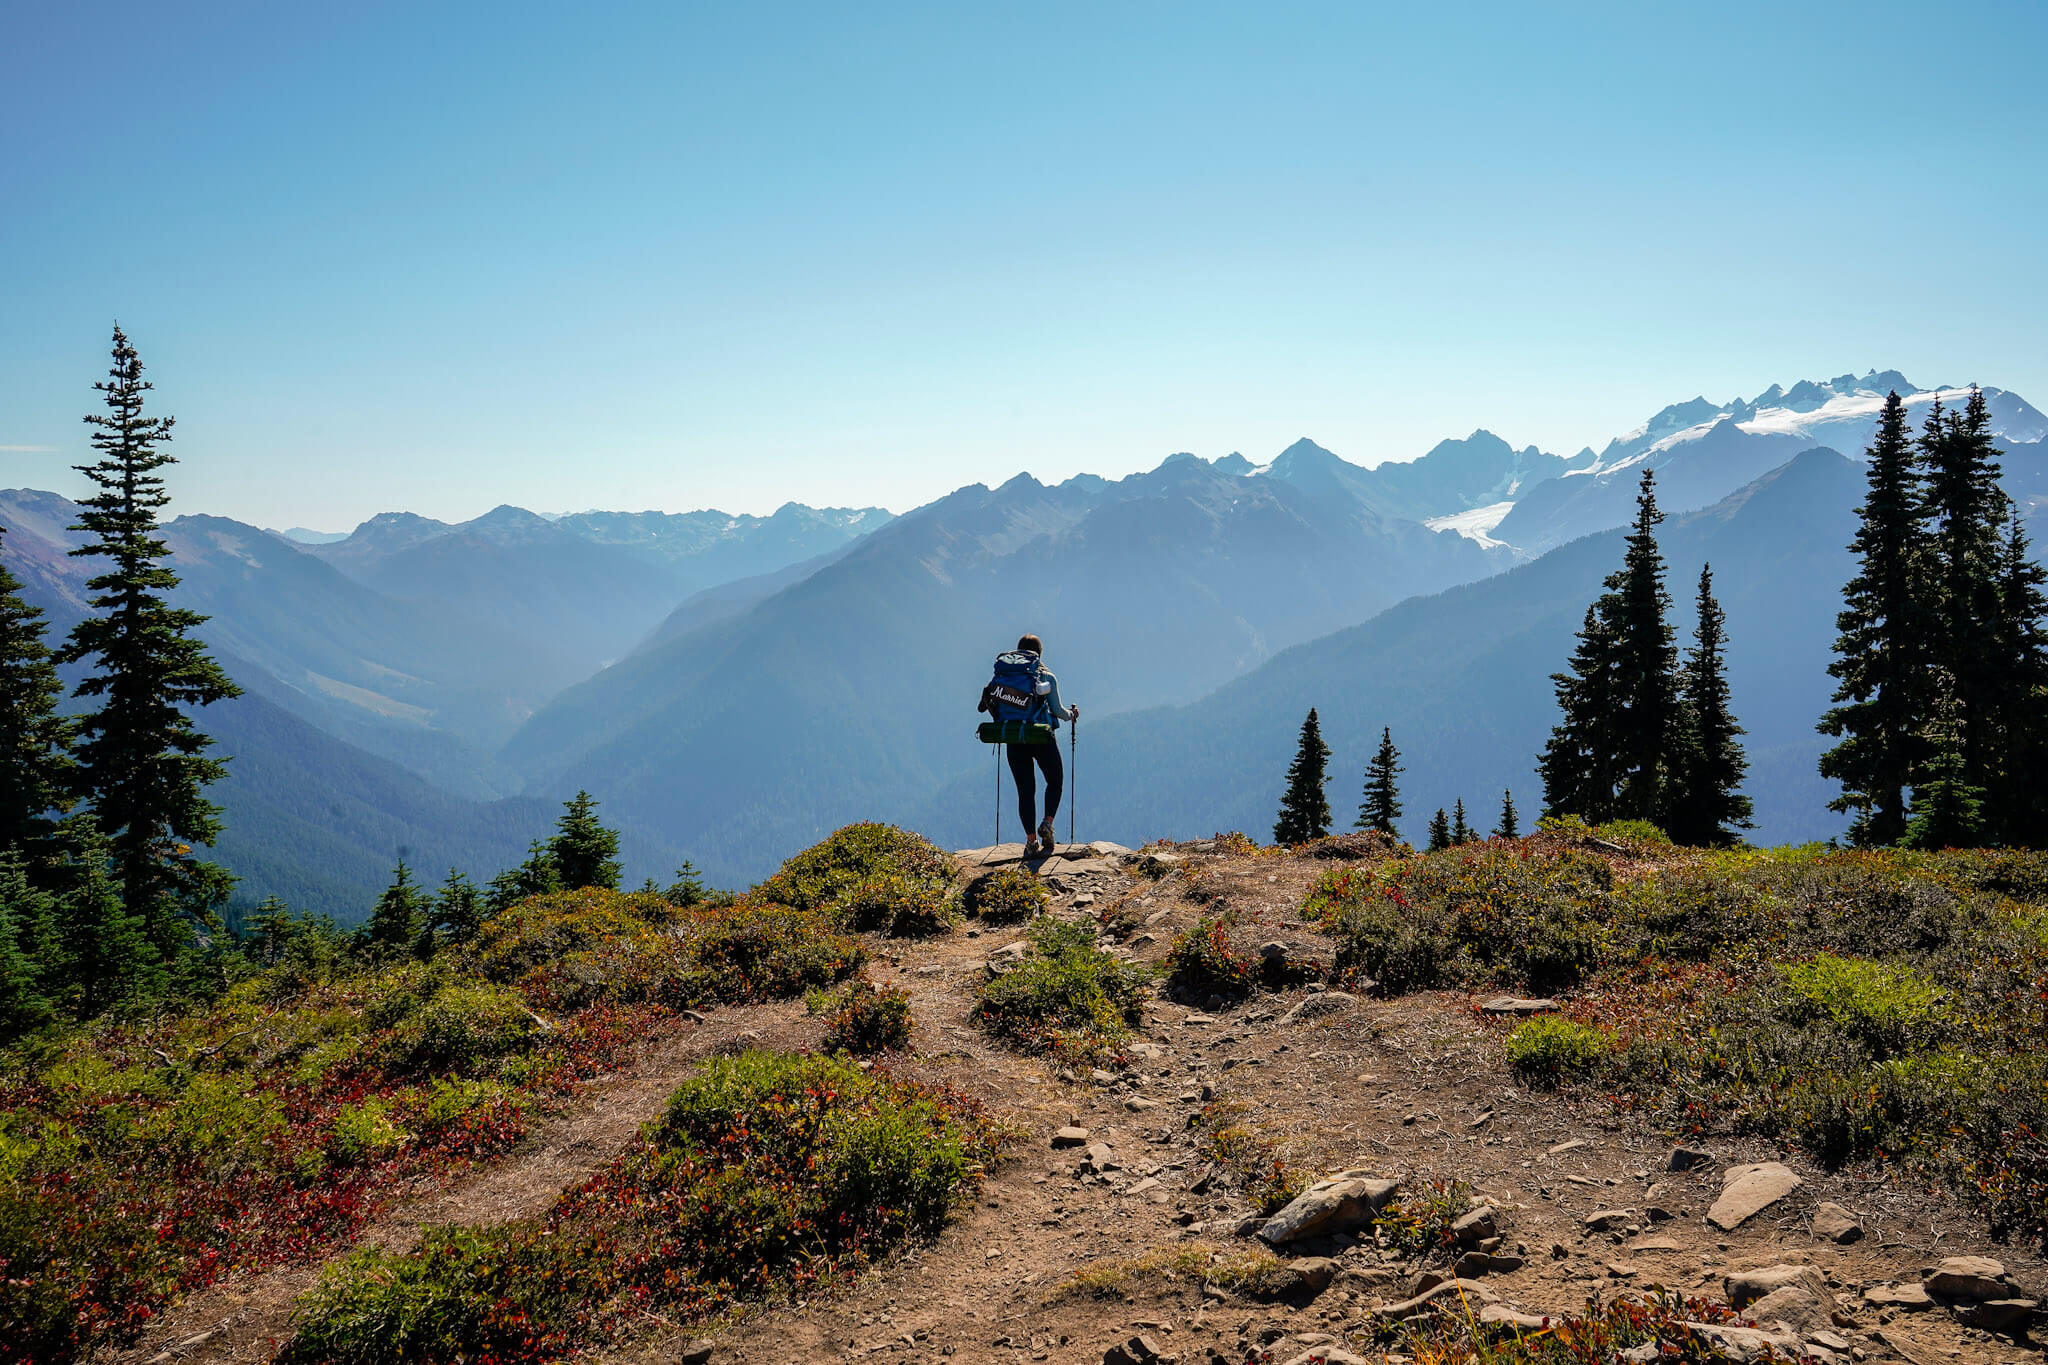 Female backpacker stands on a rock in front of the Olympic Mountains and Mt. Olympus while backpacking the Seven Lakes Basin and High Divide Trail loop in Olympic National Park.